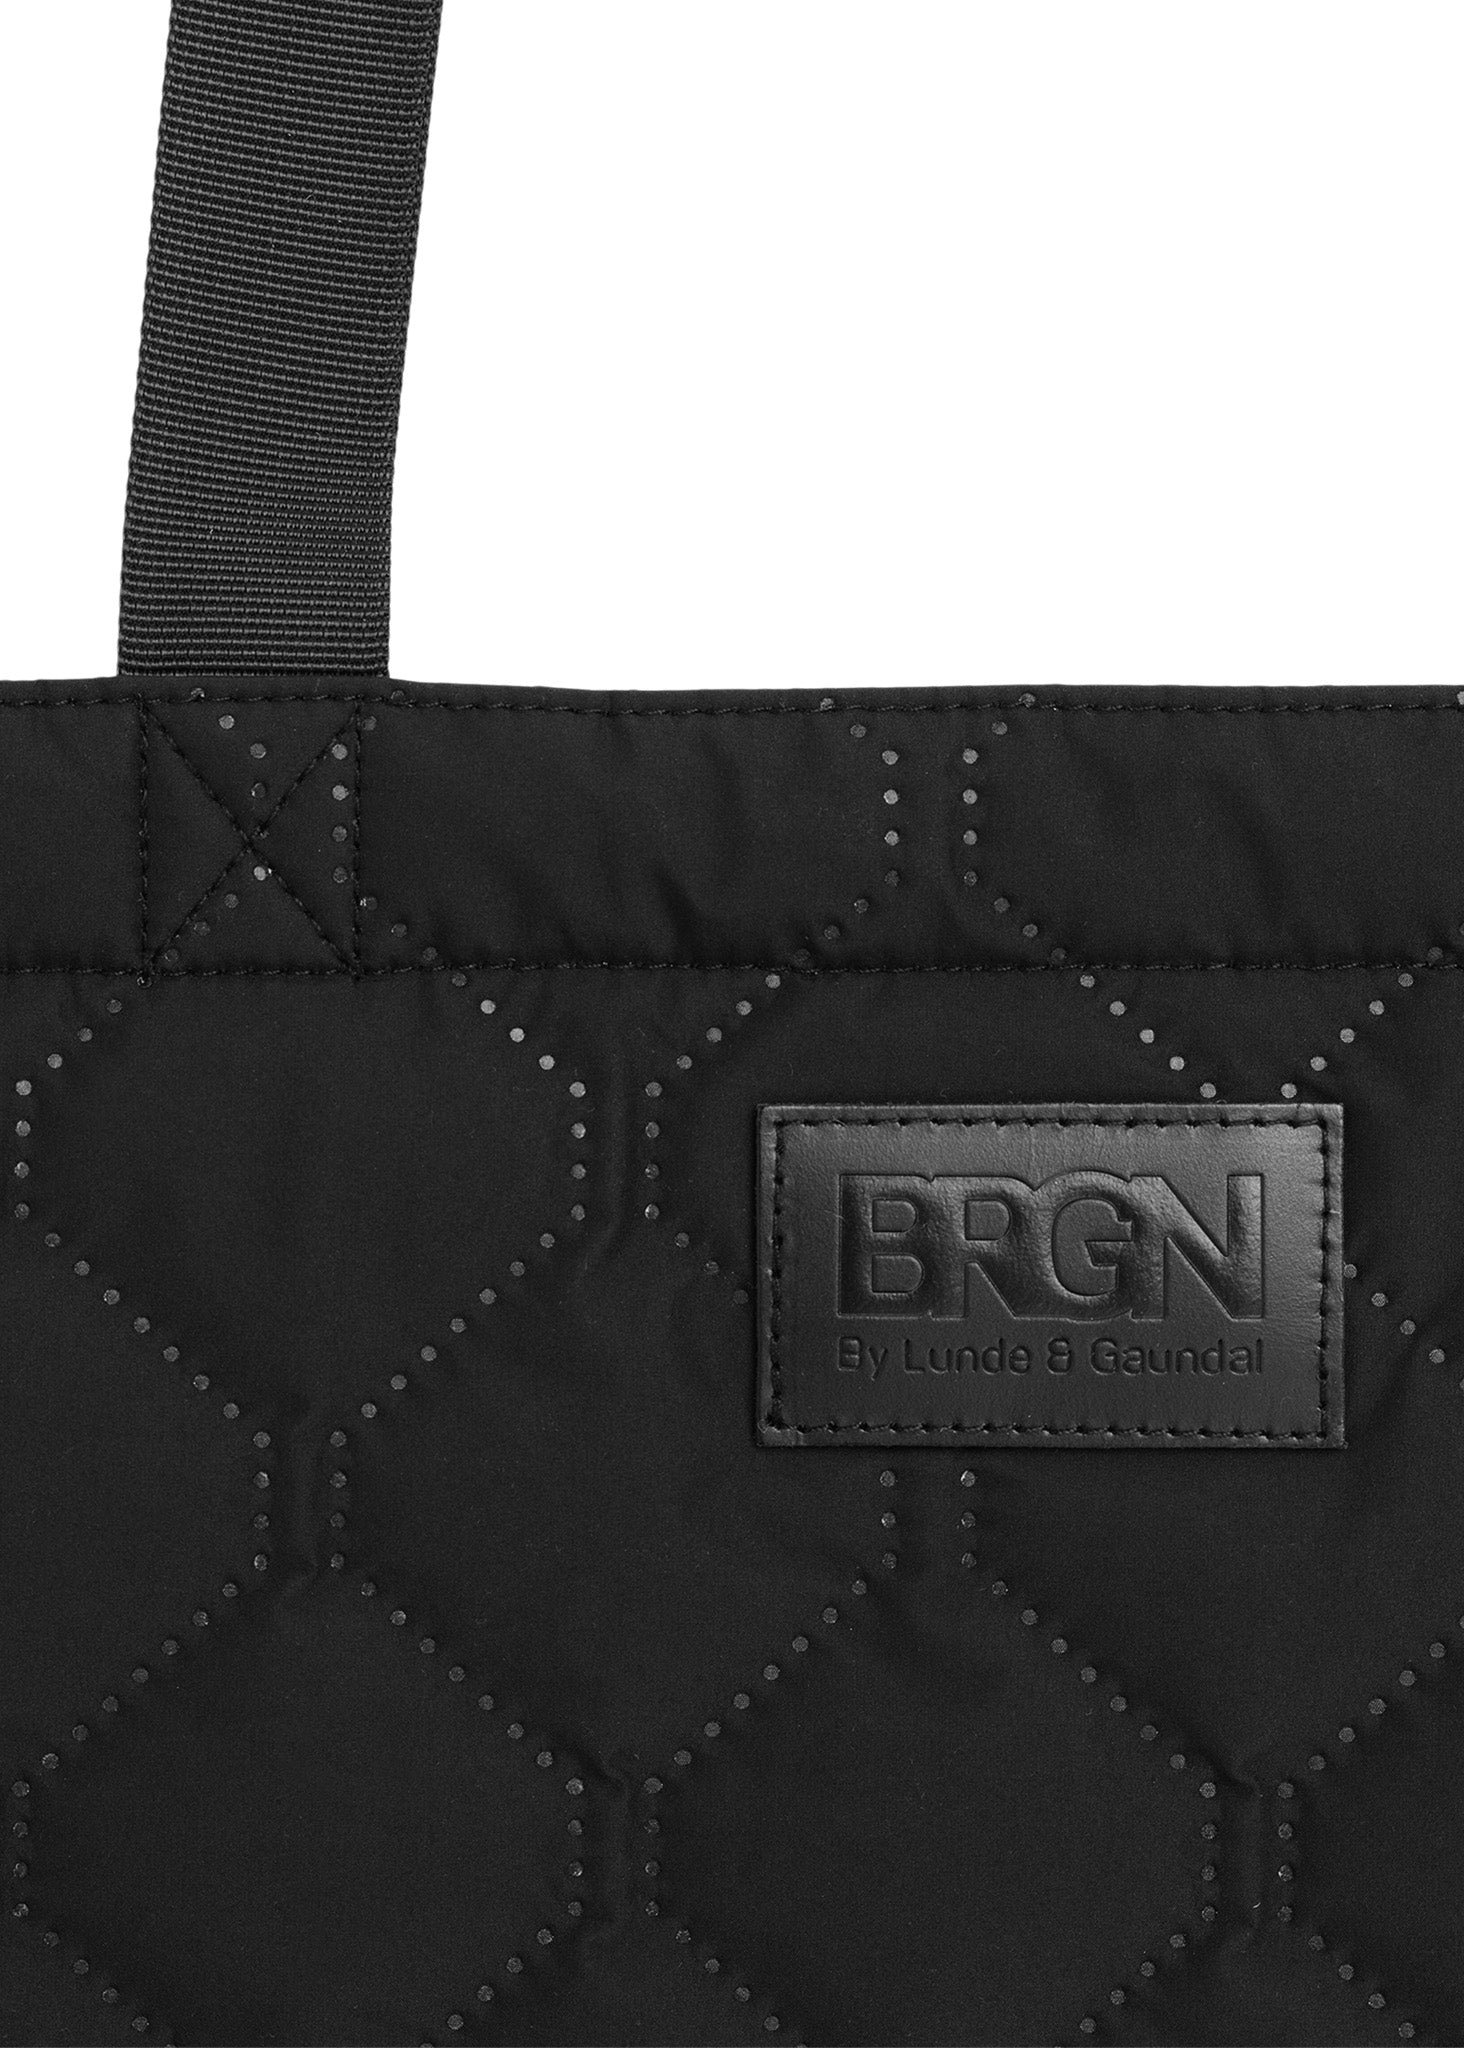 BRGN by Lunde & Gaundal Quilted Tote Bag Accessories 095 New Black